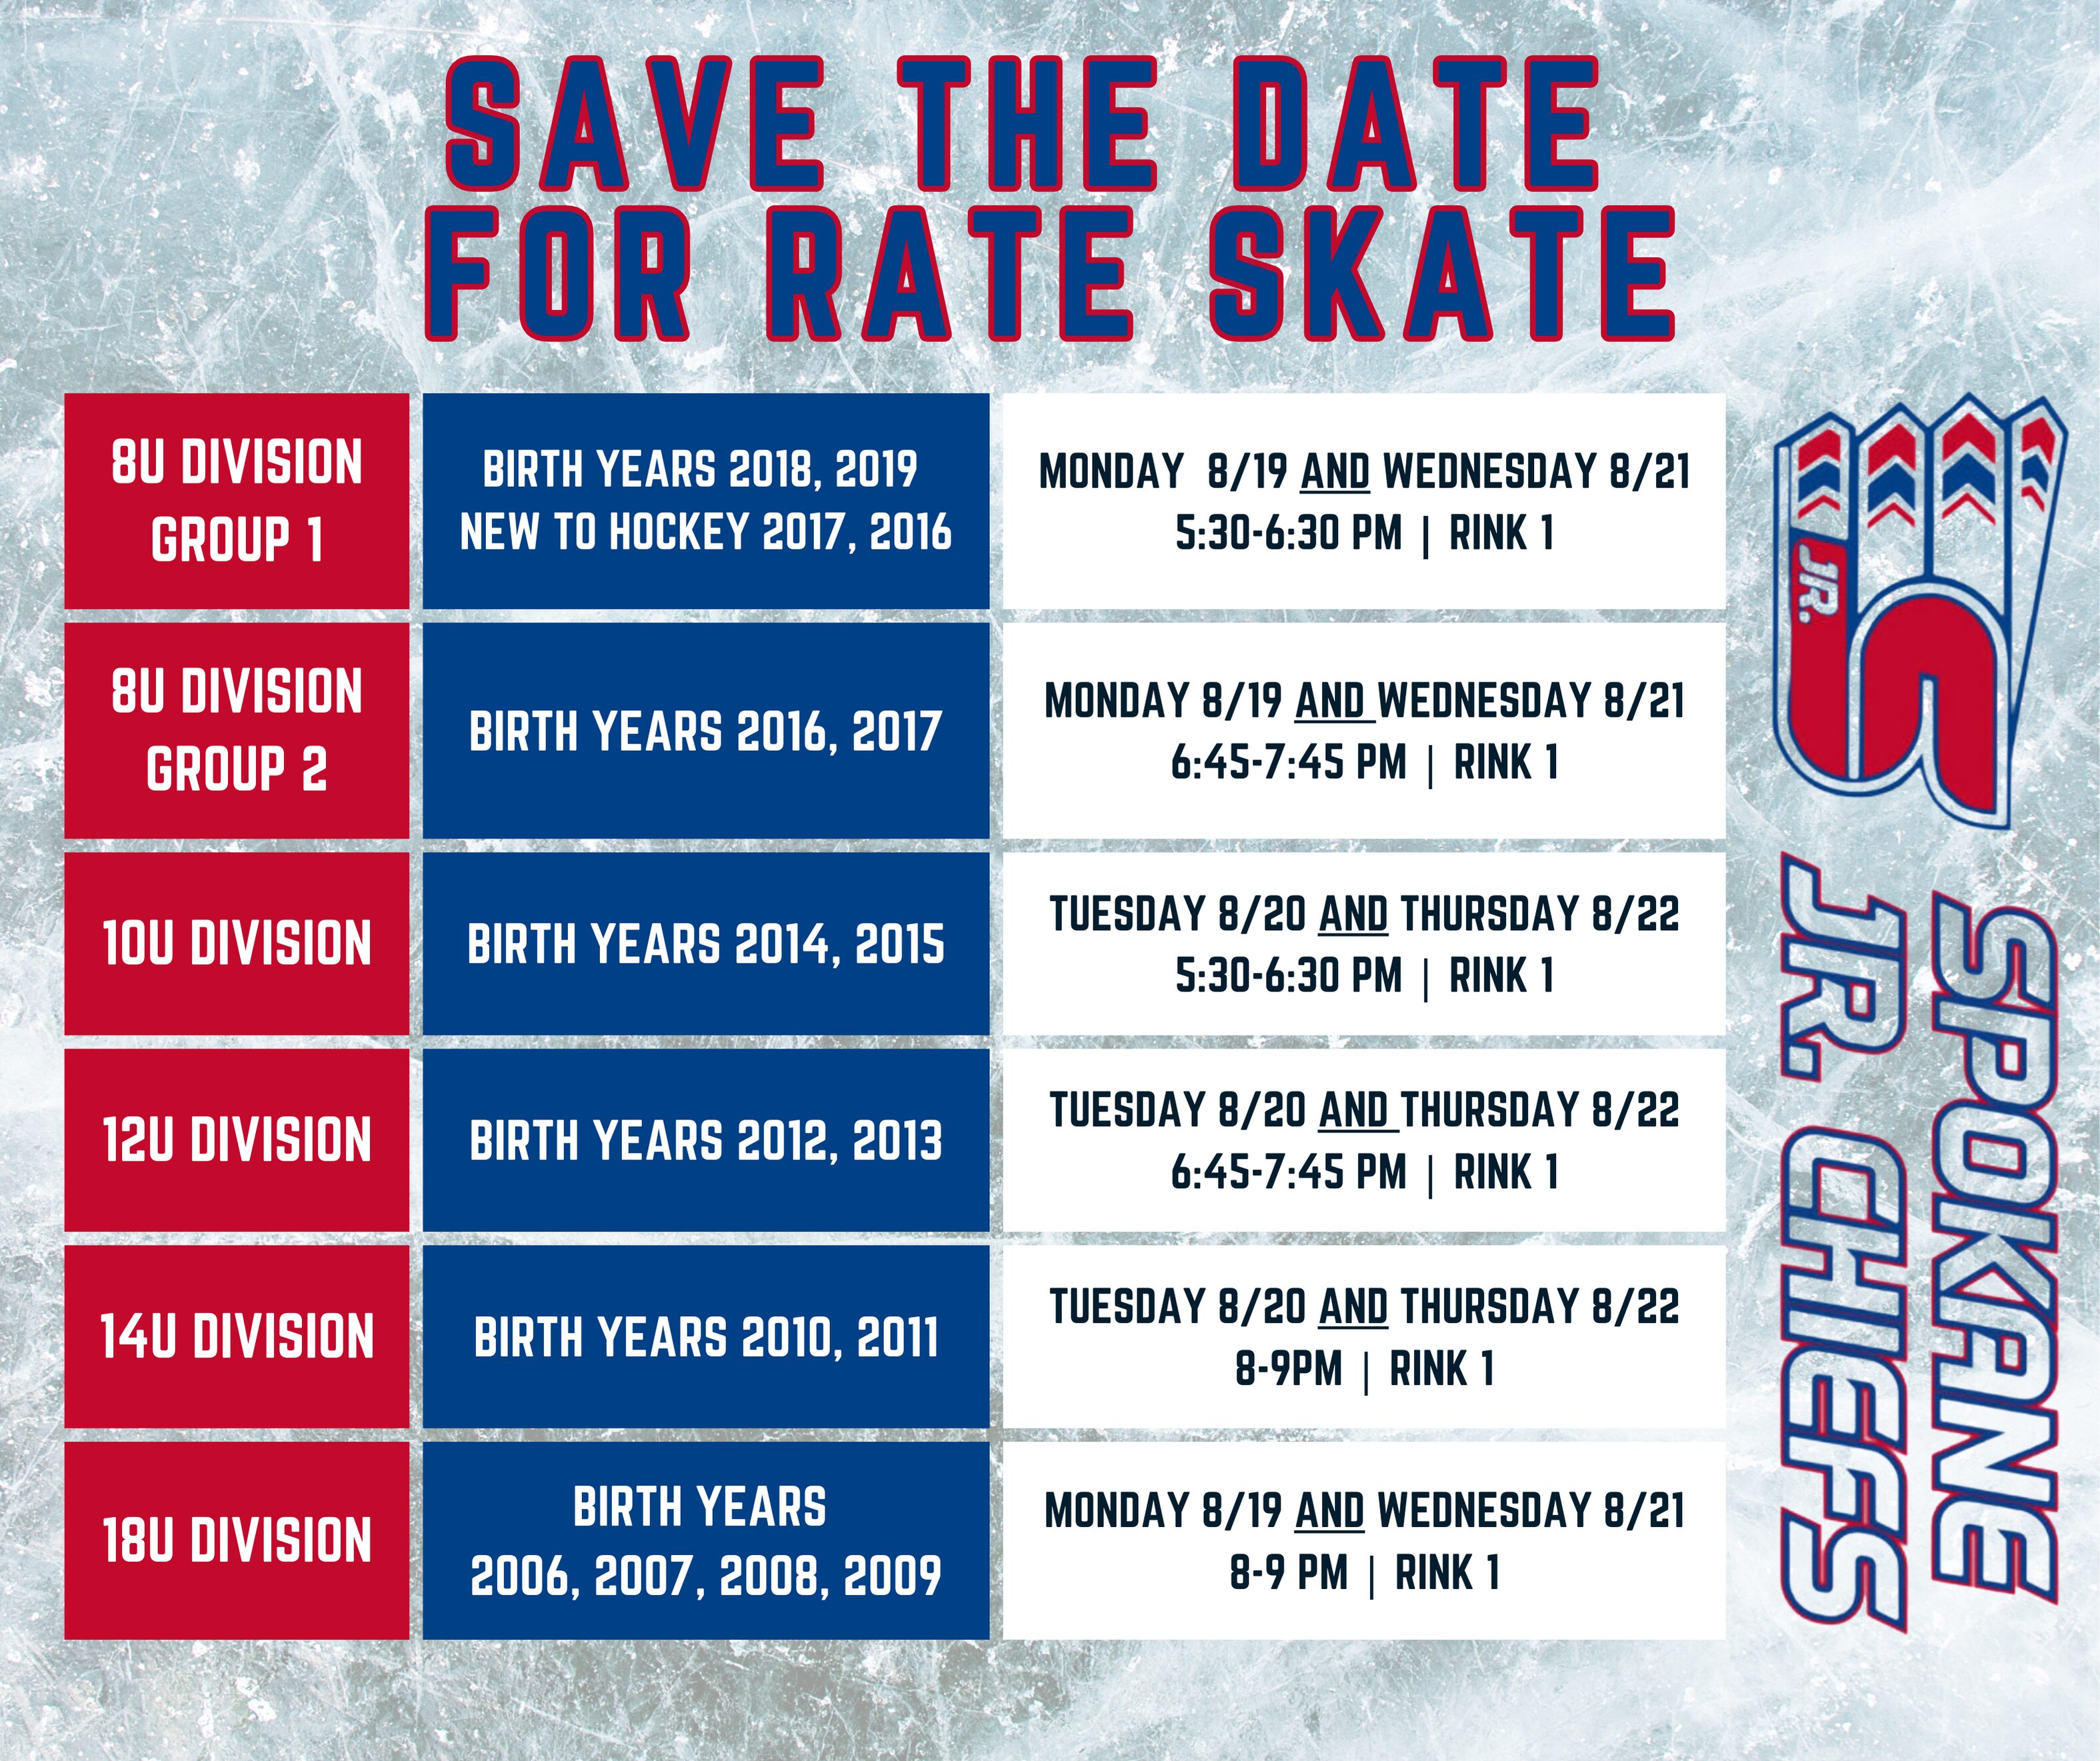 SAVE THE DATE FOR RATE SKATE (2)